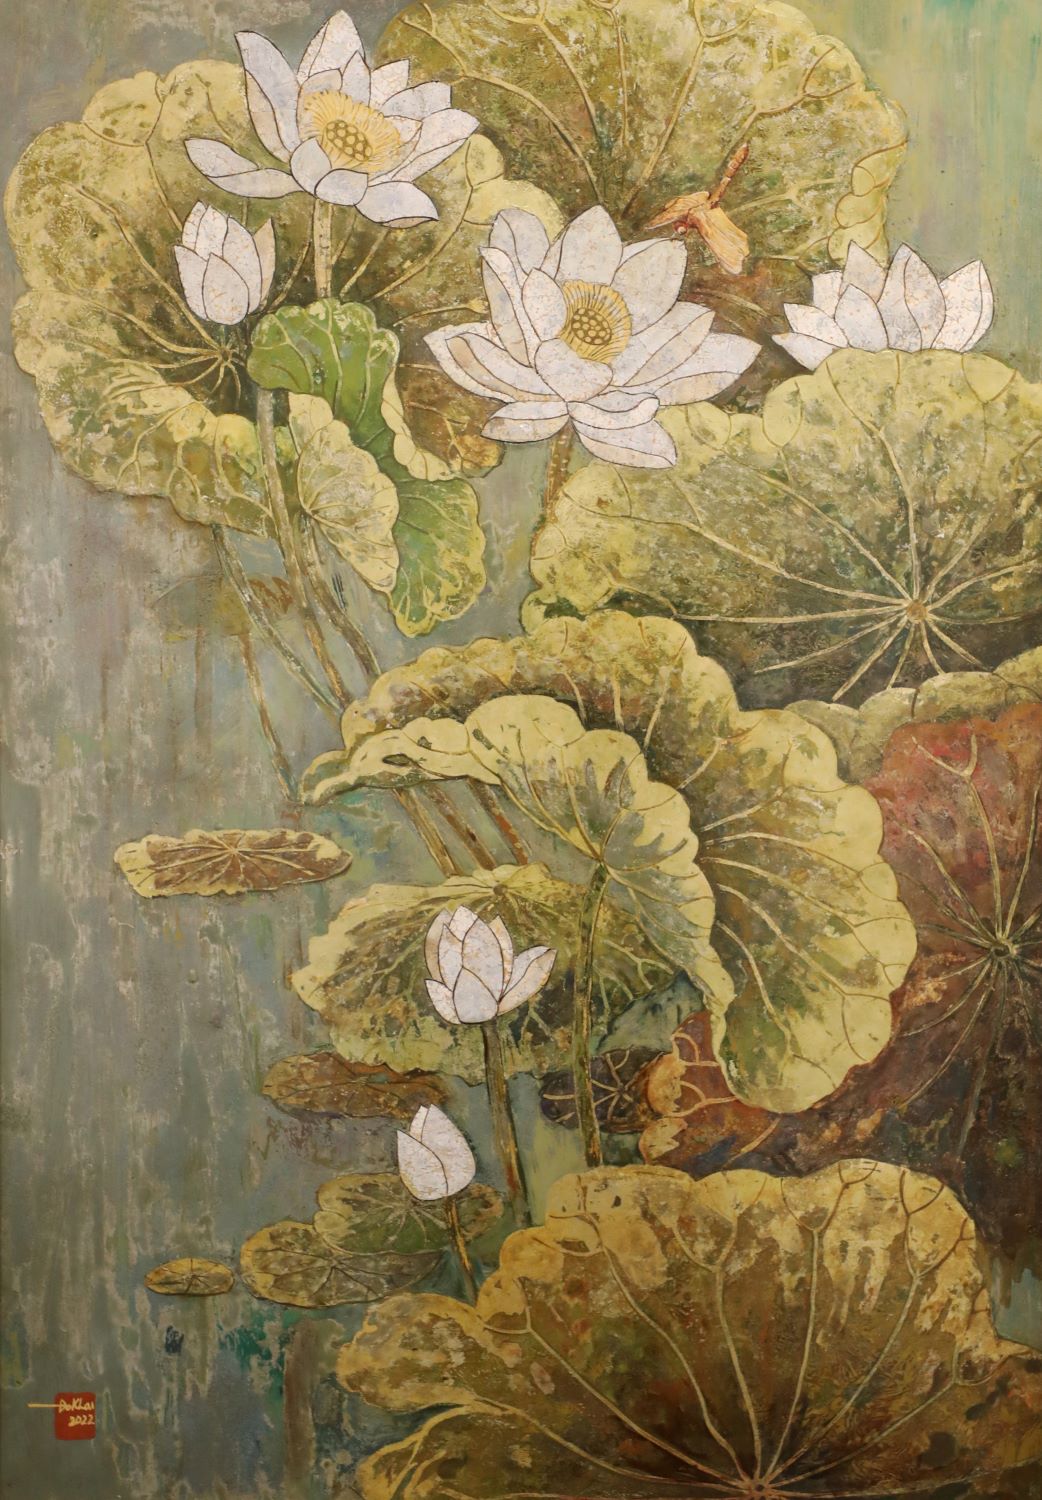 Summer Lotus IV - Vietnamese Lacquer Painting by Artist Do Khai